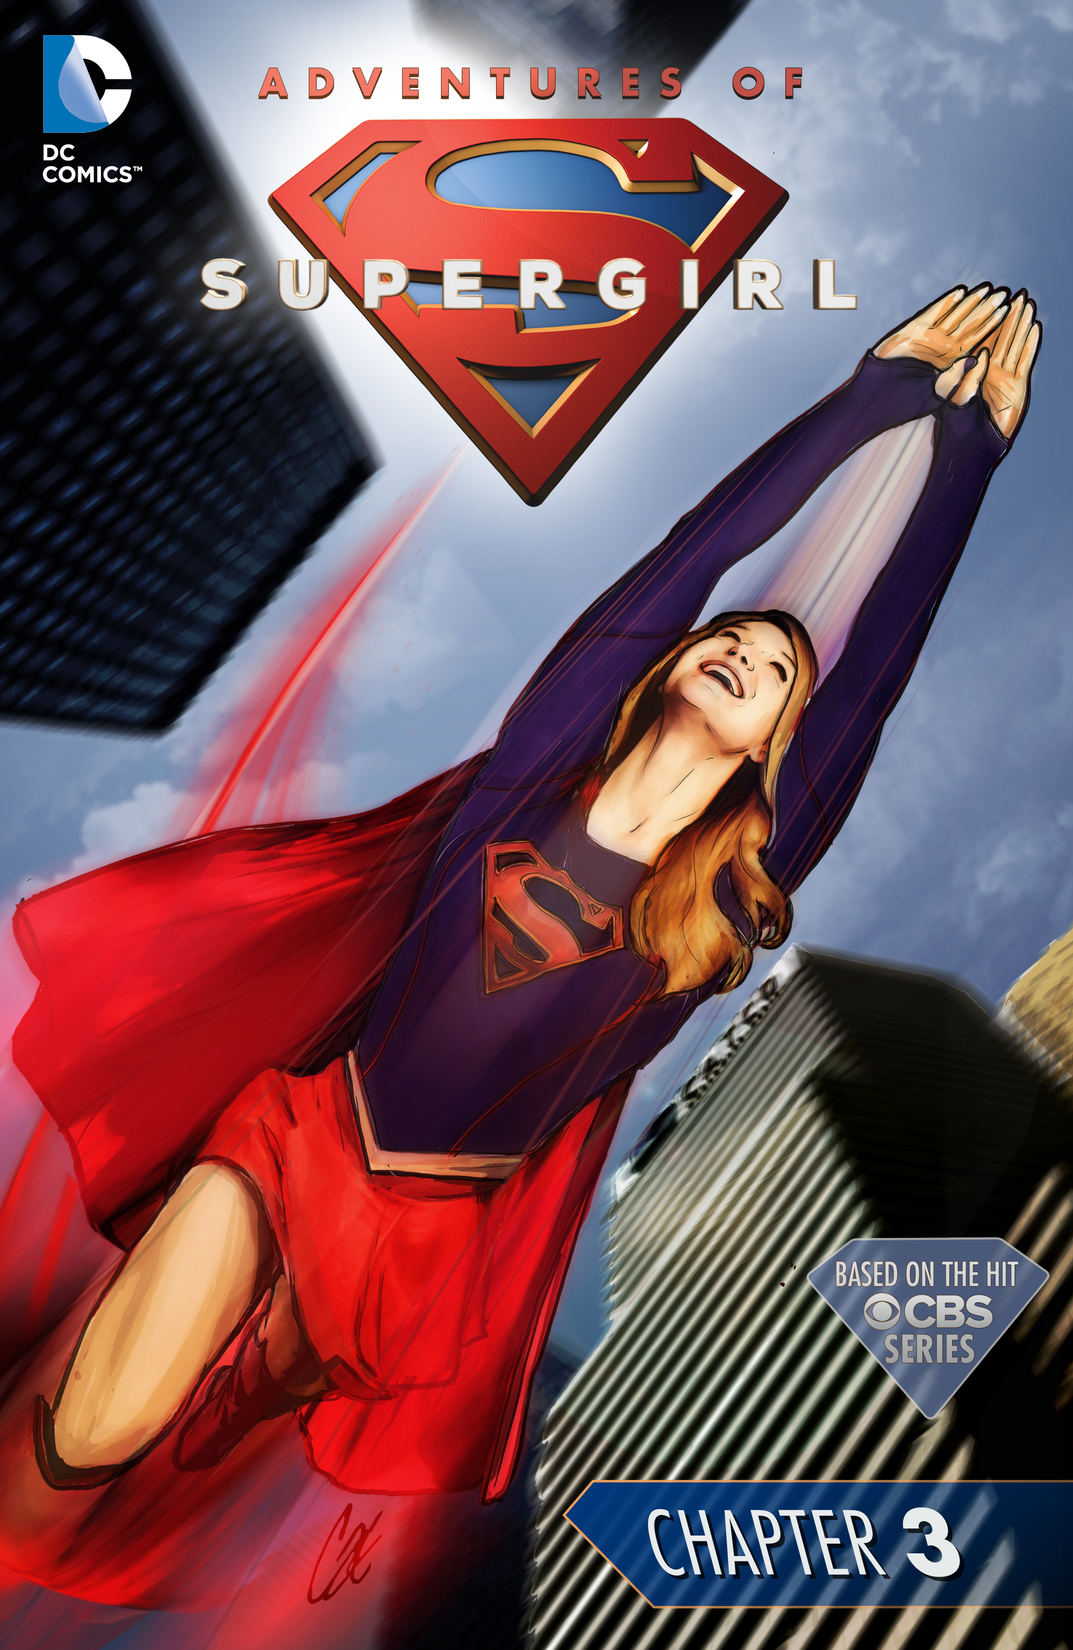 The Adventures of Supergirl #3 preview images